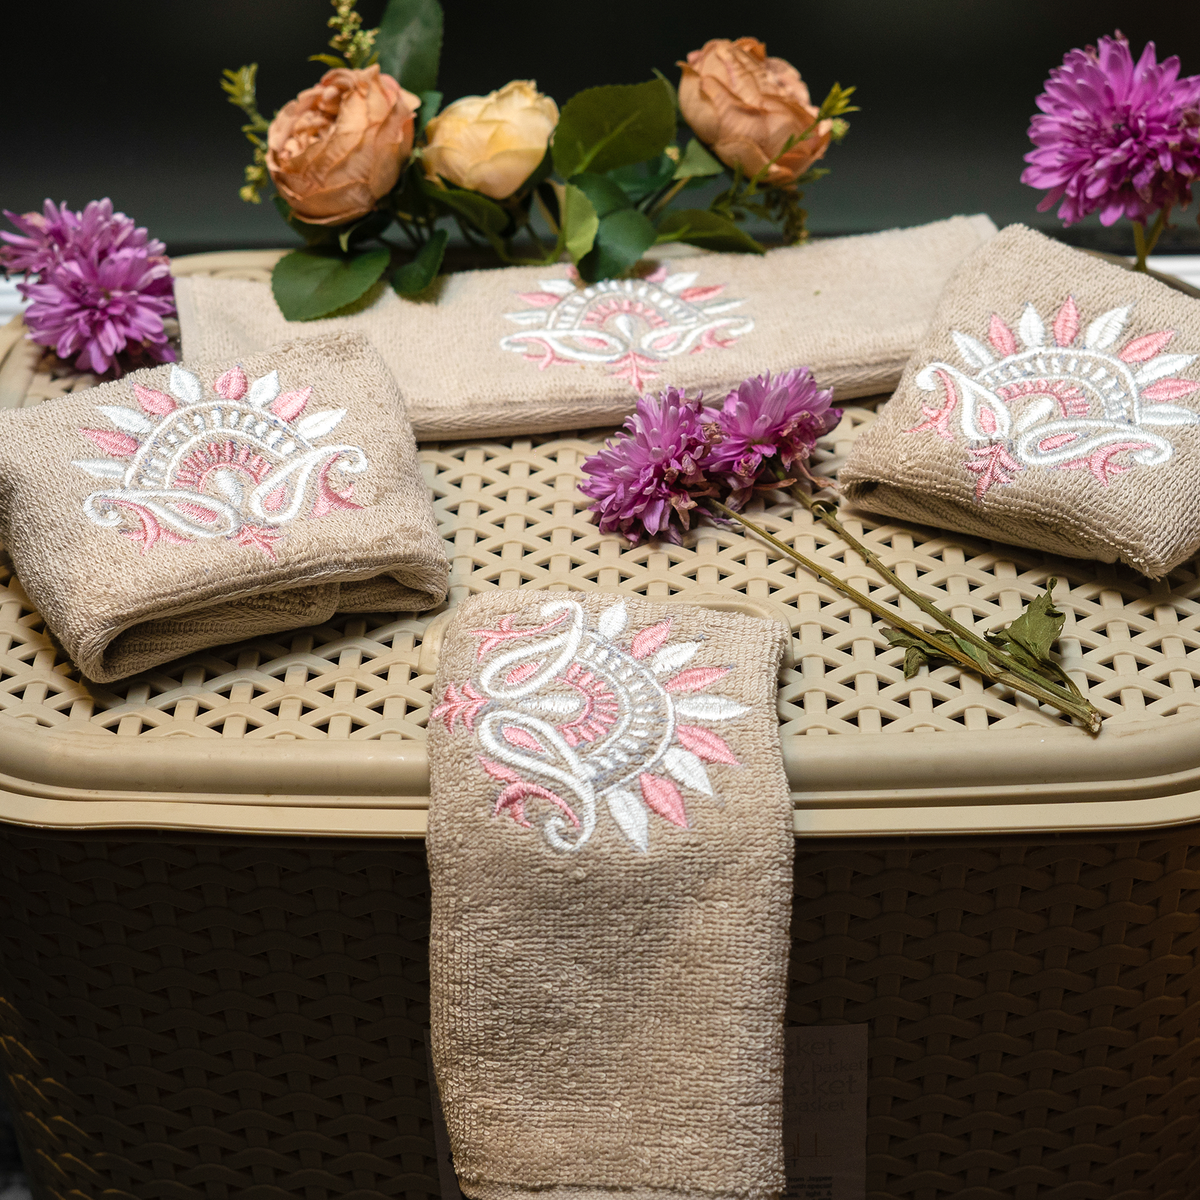 The Luxelife Light Beige Embroidered Face Towel